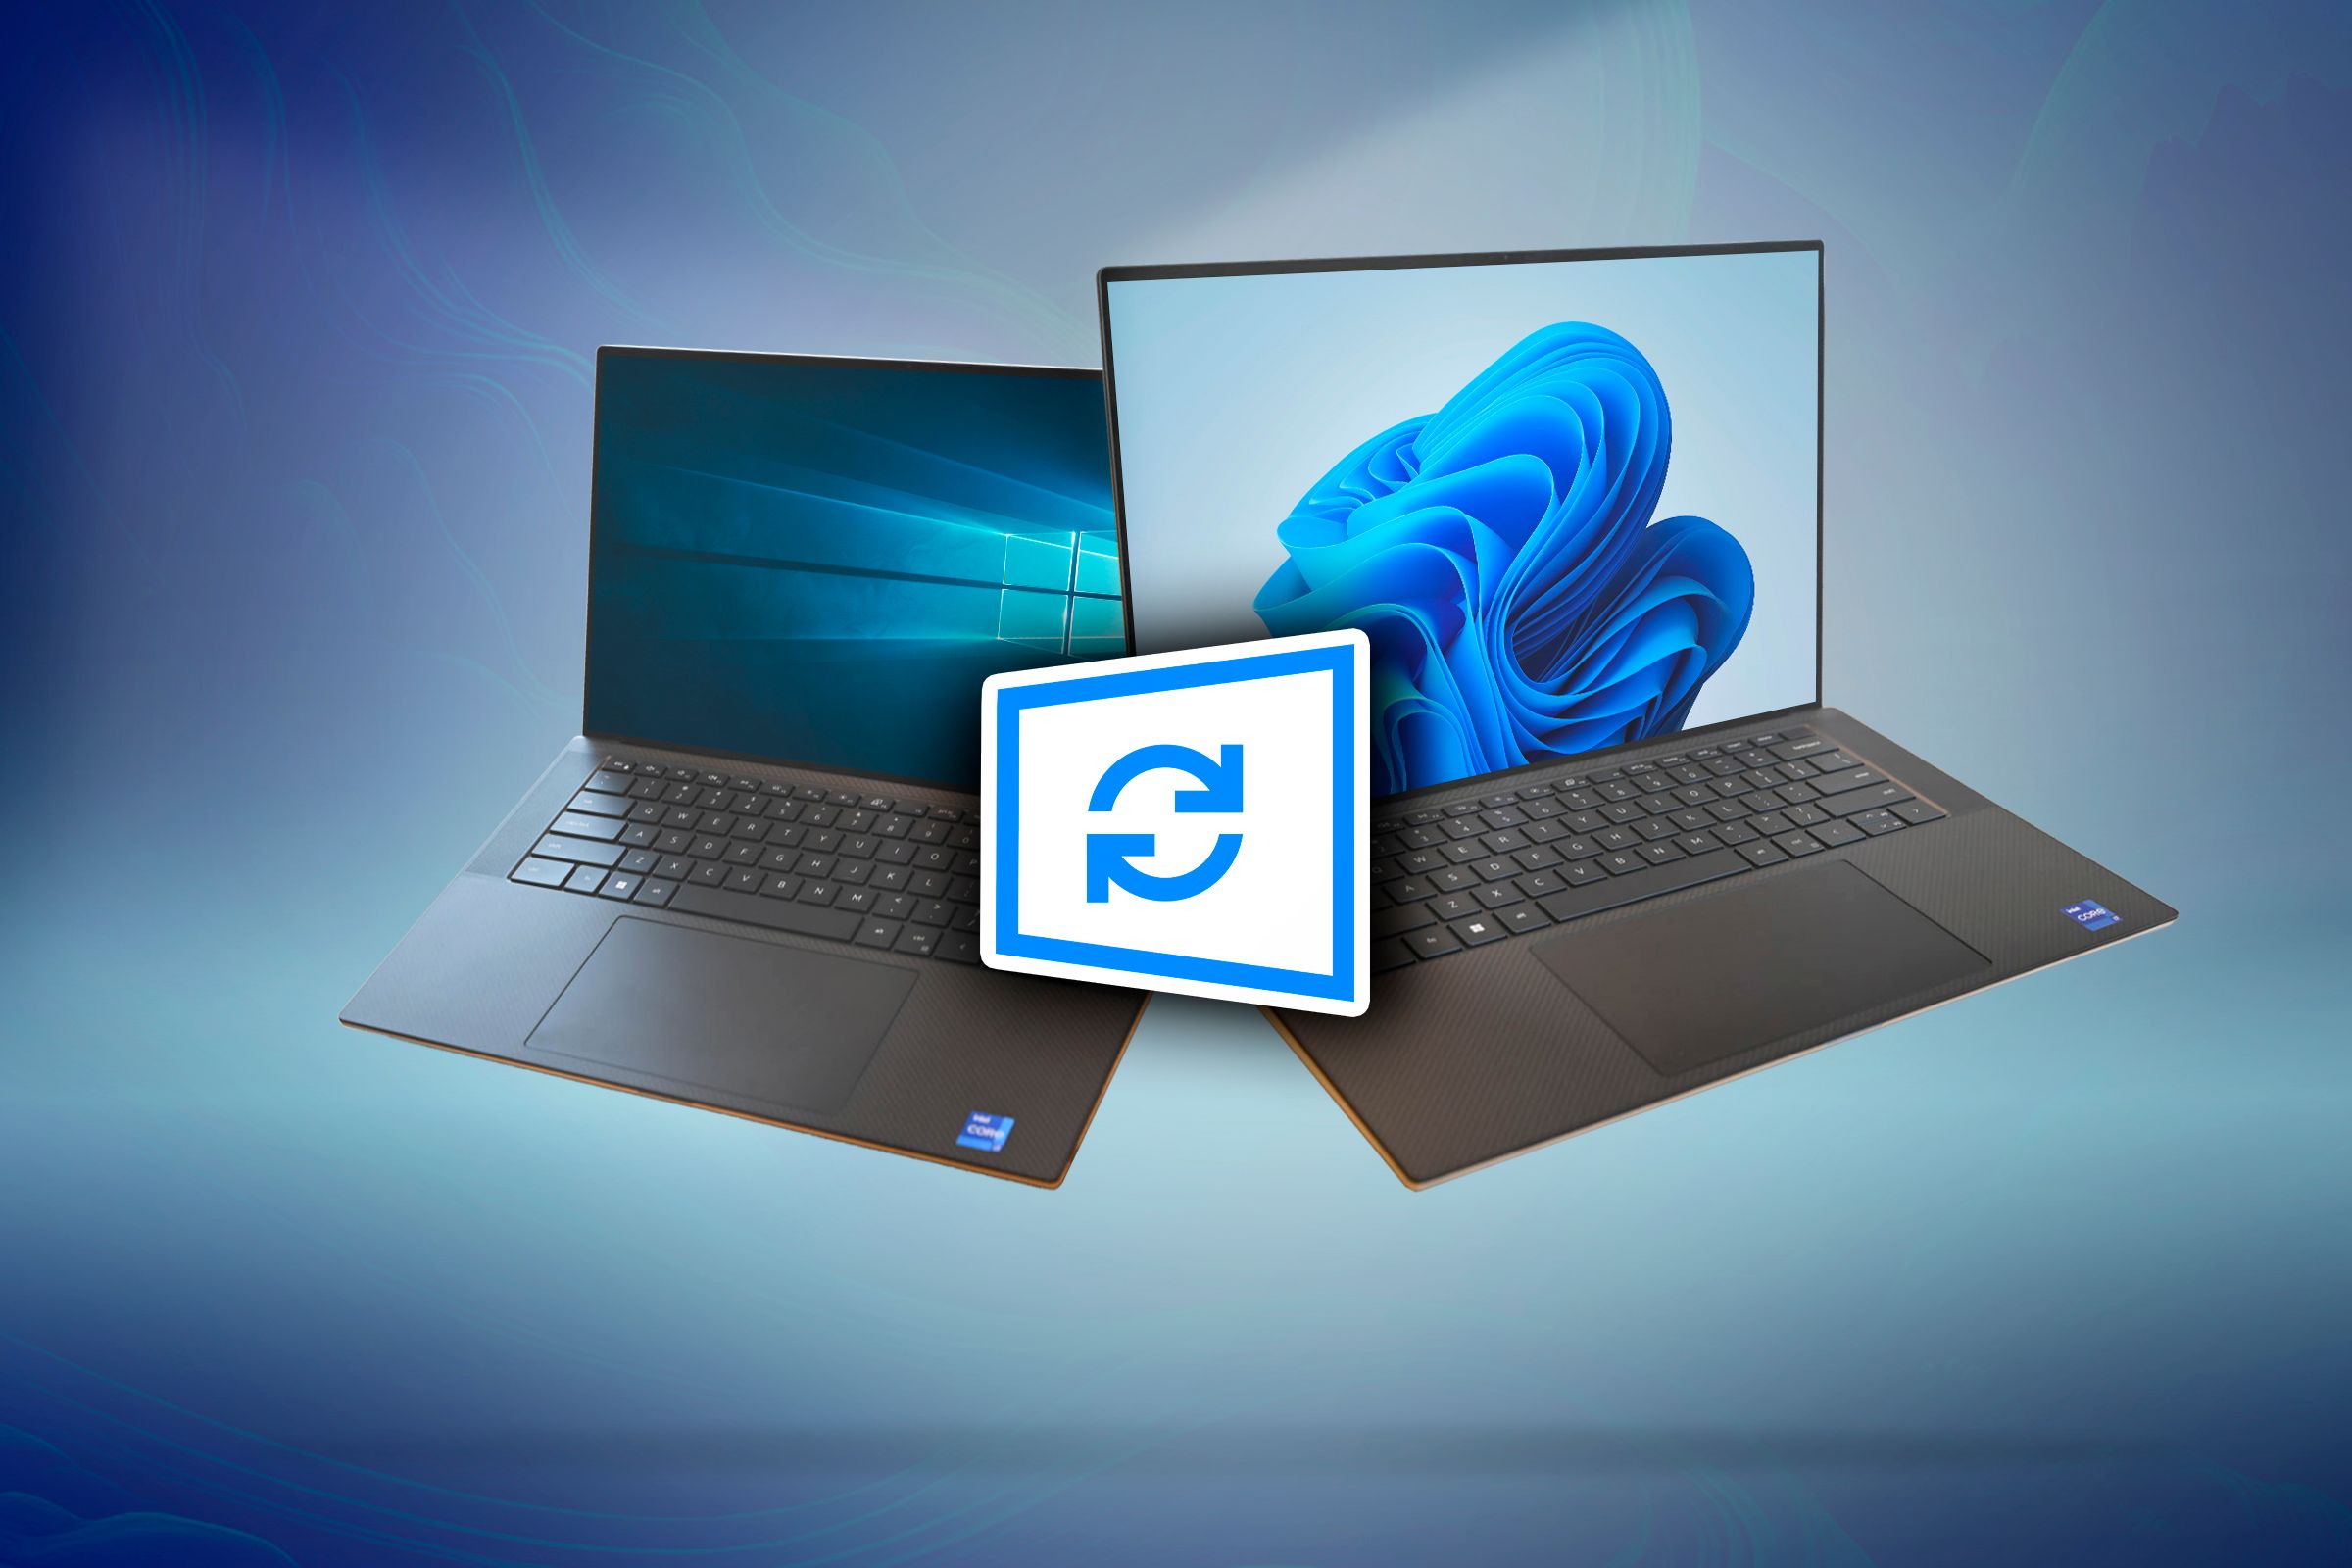 Laptop with Windows 10 on the left, and laptop with Windows 11 on the right, with an update icon in the center.